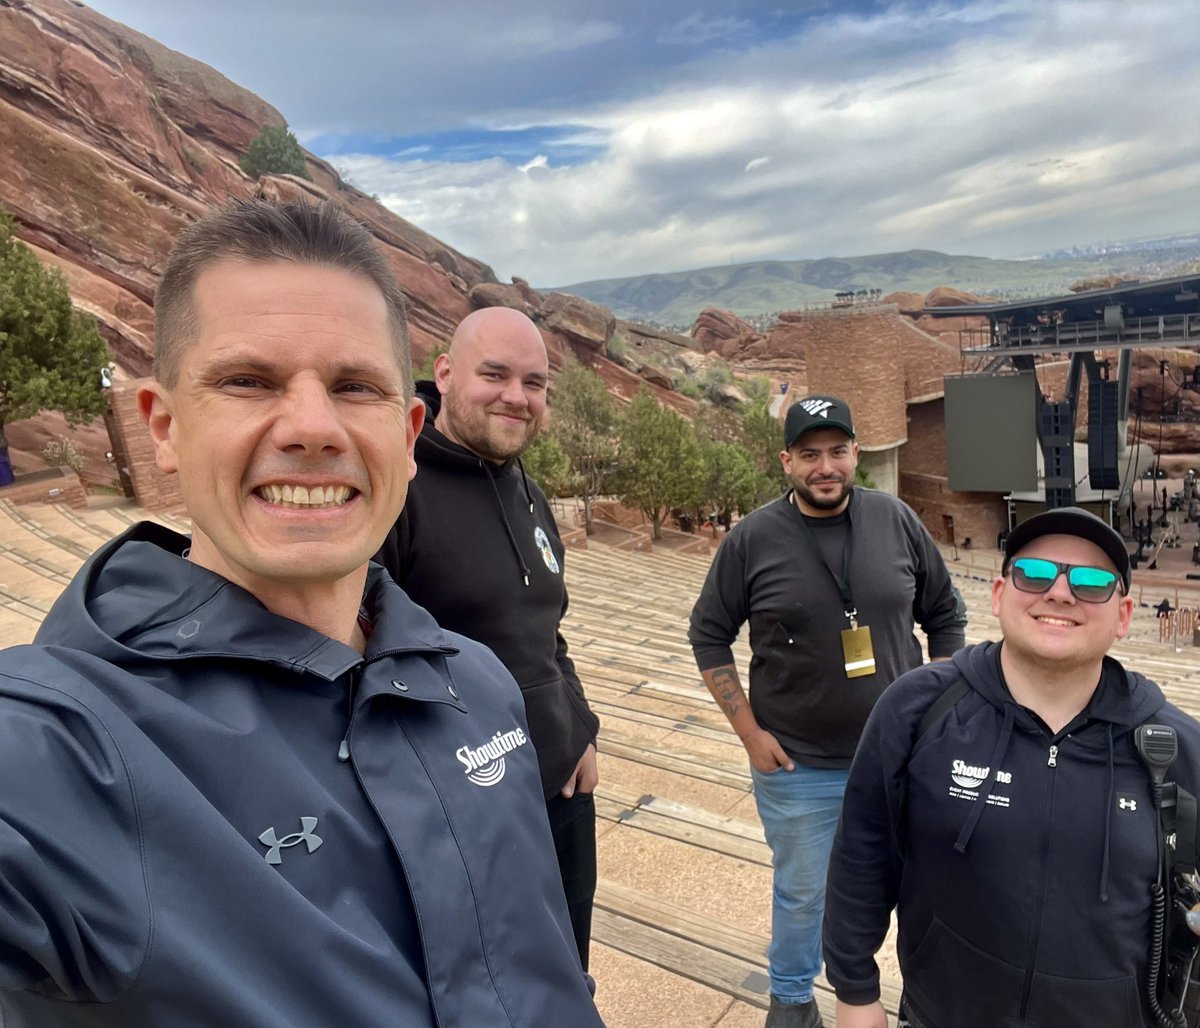 What’s Out of the Warehouse this Wednesday? Our team! You’ll find our hard-working crew at epic stops like @RedRocksCO where we provided full tour production for one of our favorite clients, Heilung! 🎫 

#WITWW #RedRocks #summerconcerts #concert #tourproduction #showtingtouring